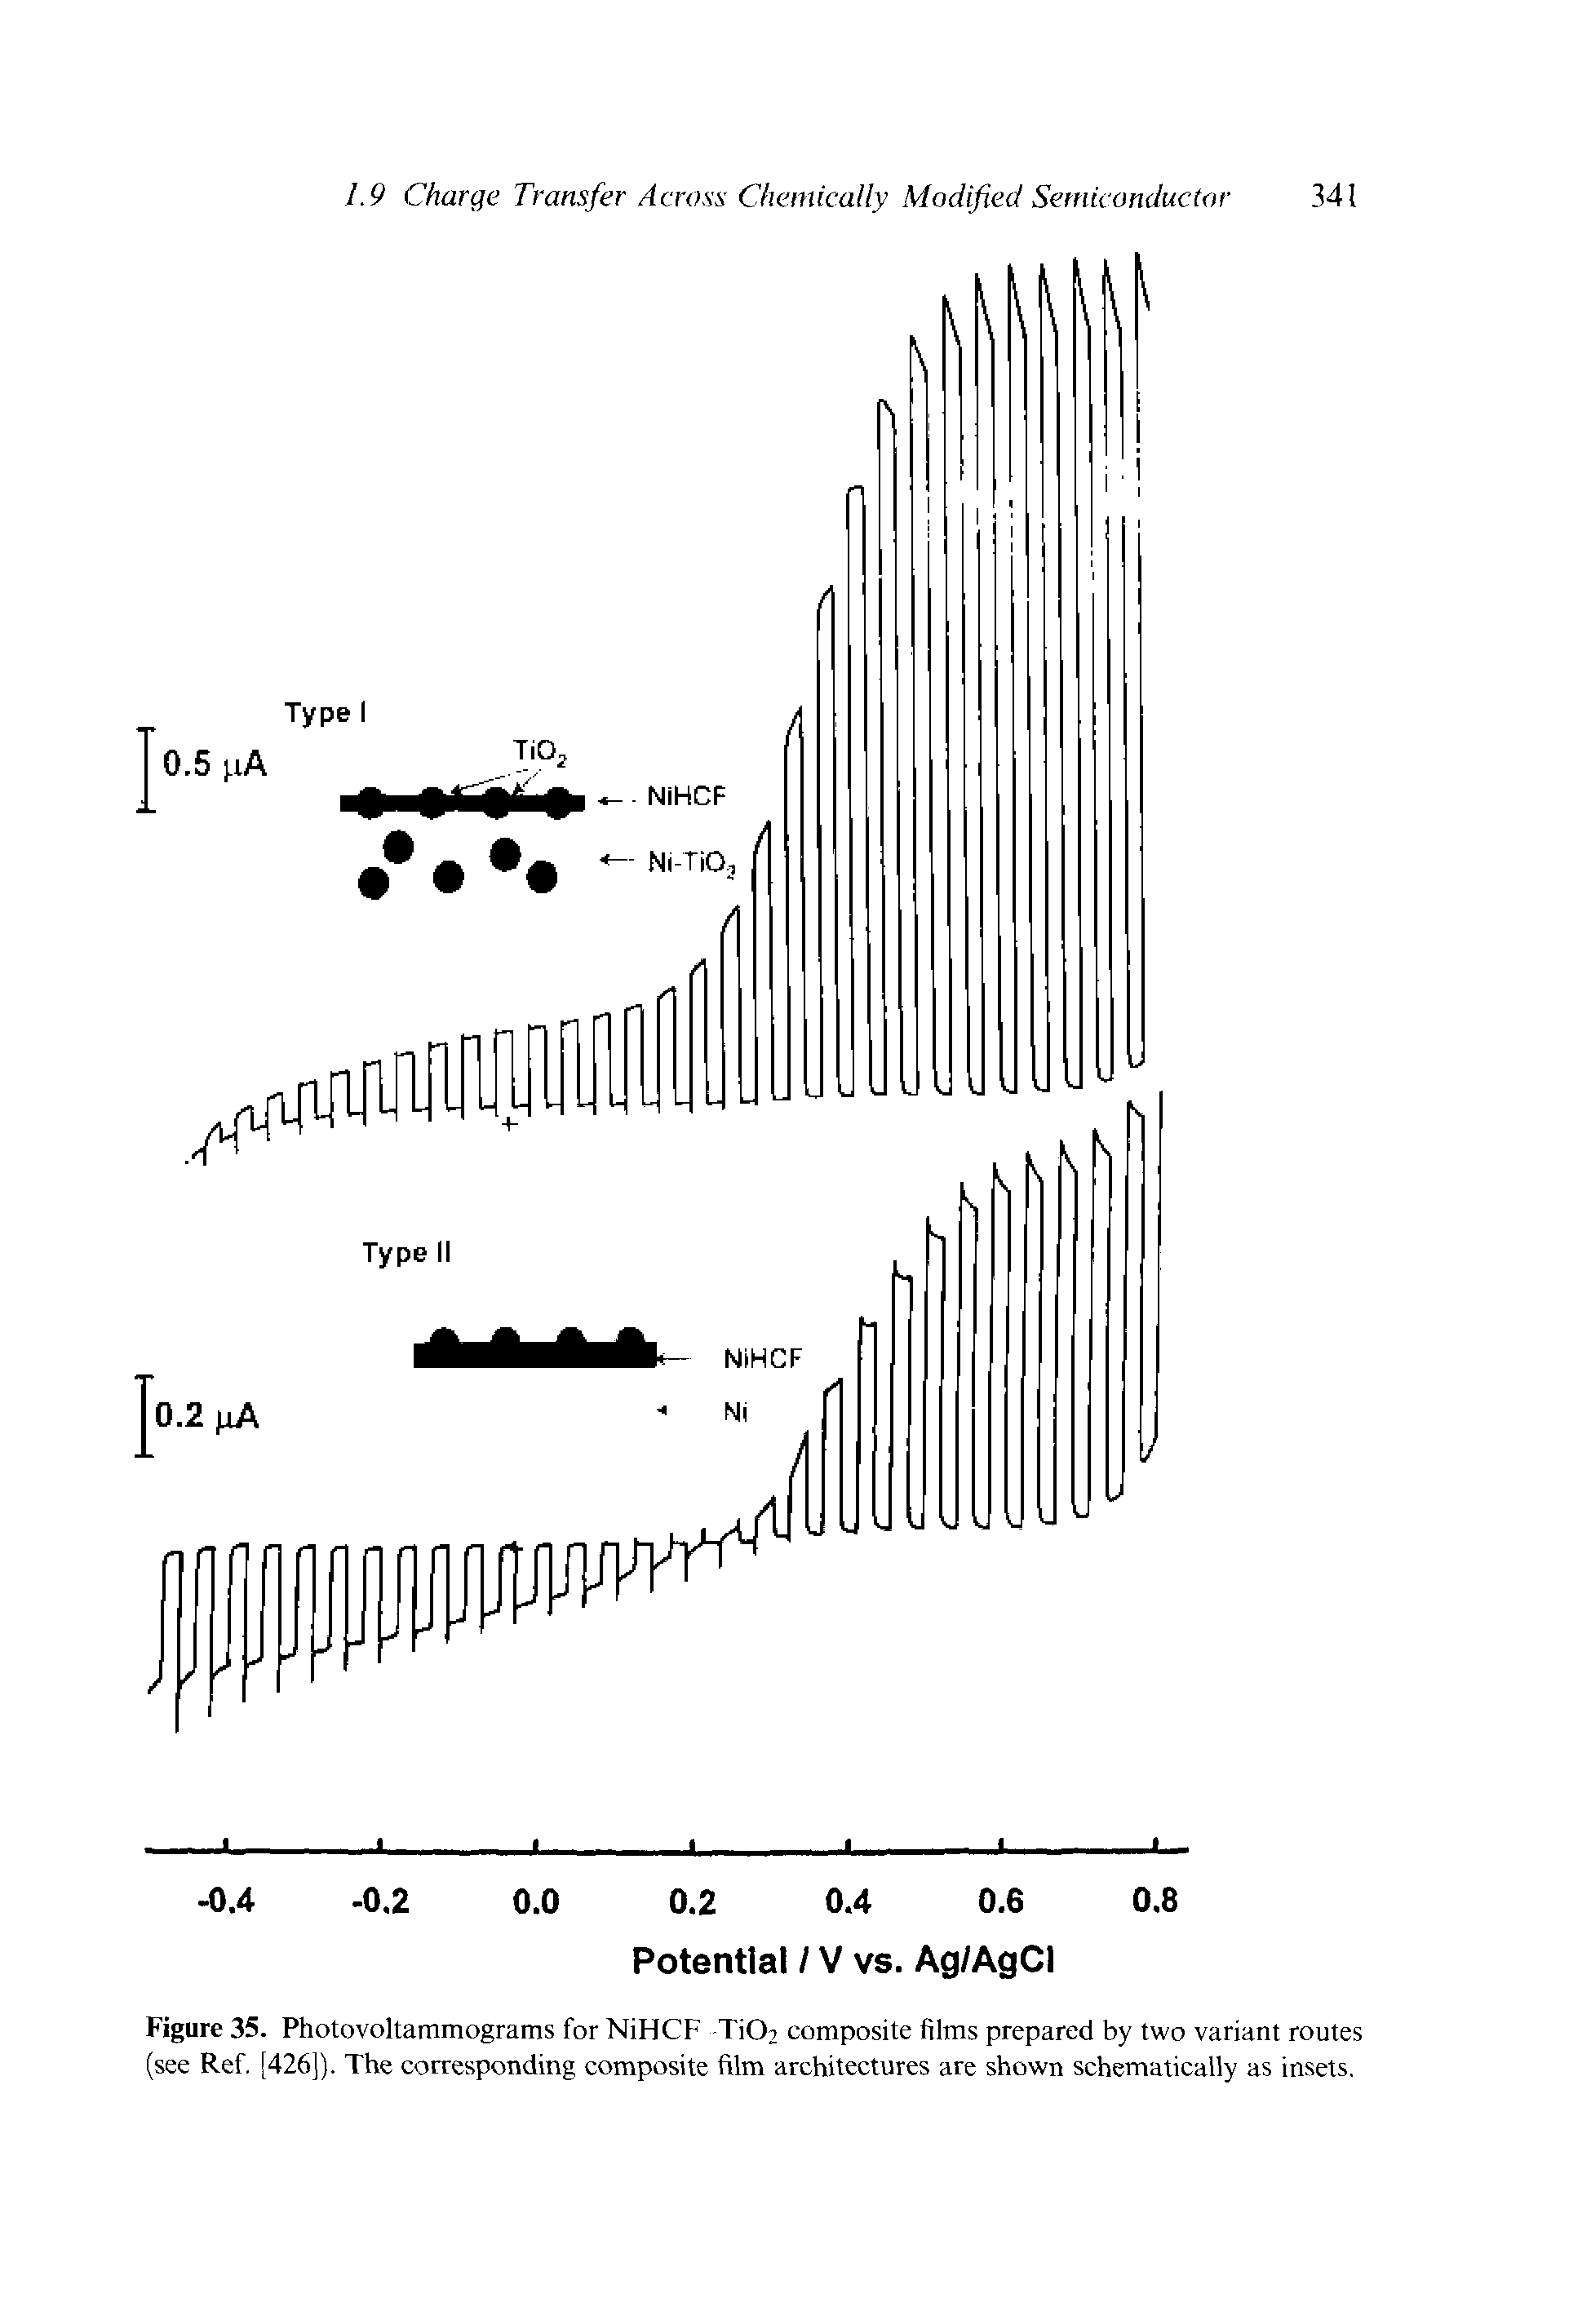 Figure 35. Photovoltammograms for NiHCF TiO composite films prepared by two variant routes (see Ref, [426]). The corresponding composite film architectures are shown schematically as insets.